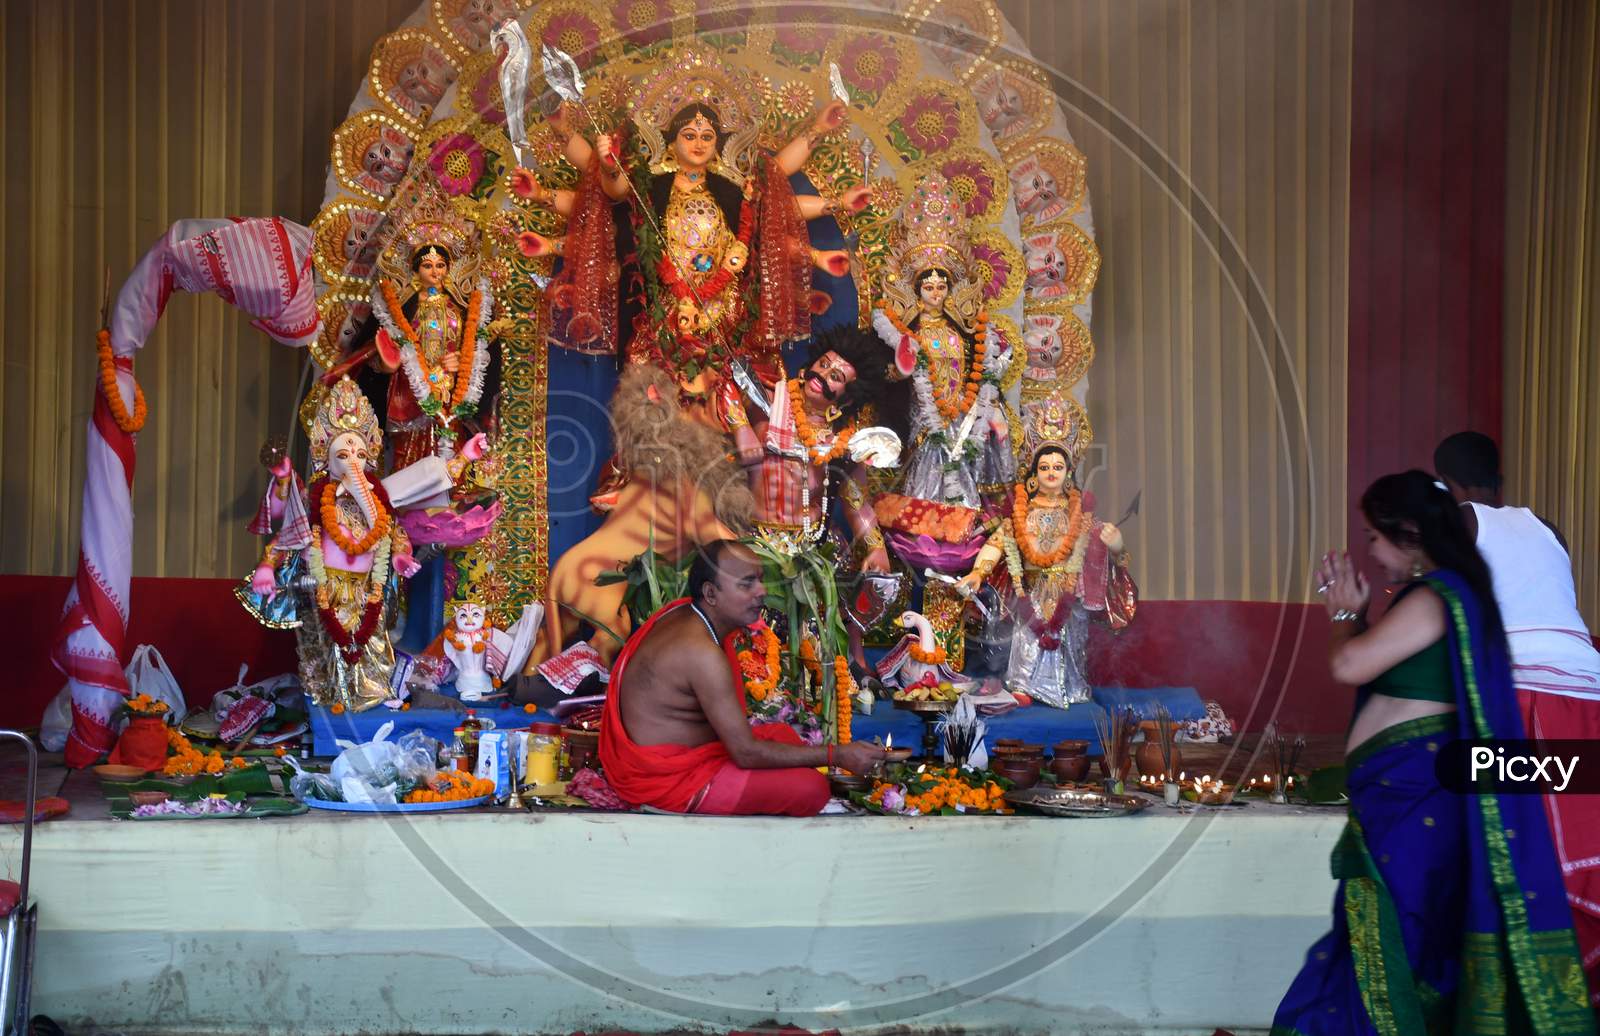 Devotees offer prayers at a community pandal during the Maha  navami  of Durga Puja, in Guwahati on Oct 25,2020